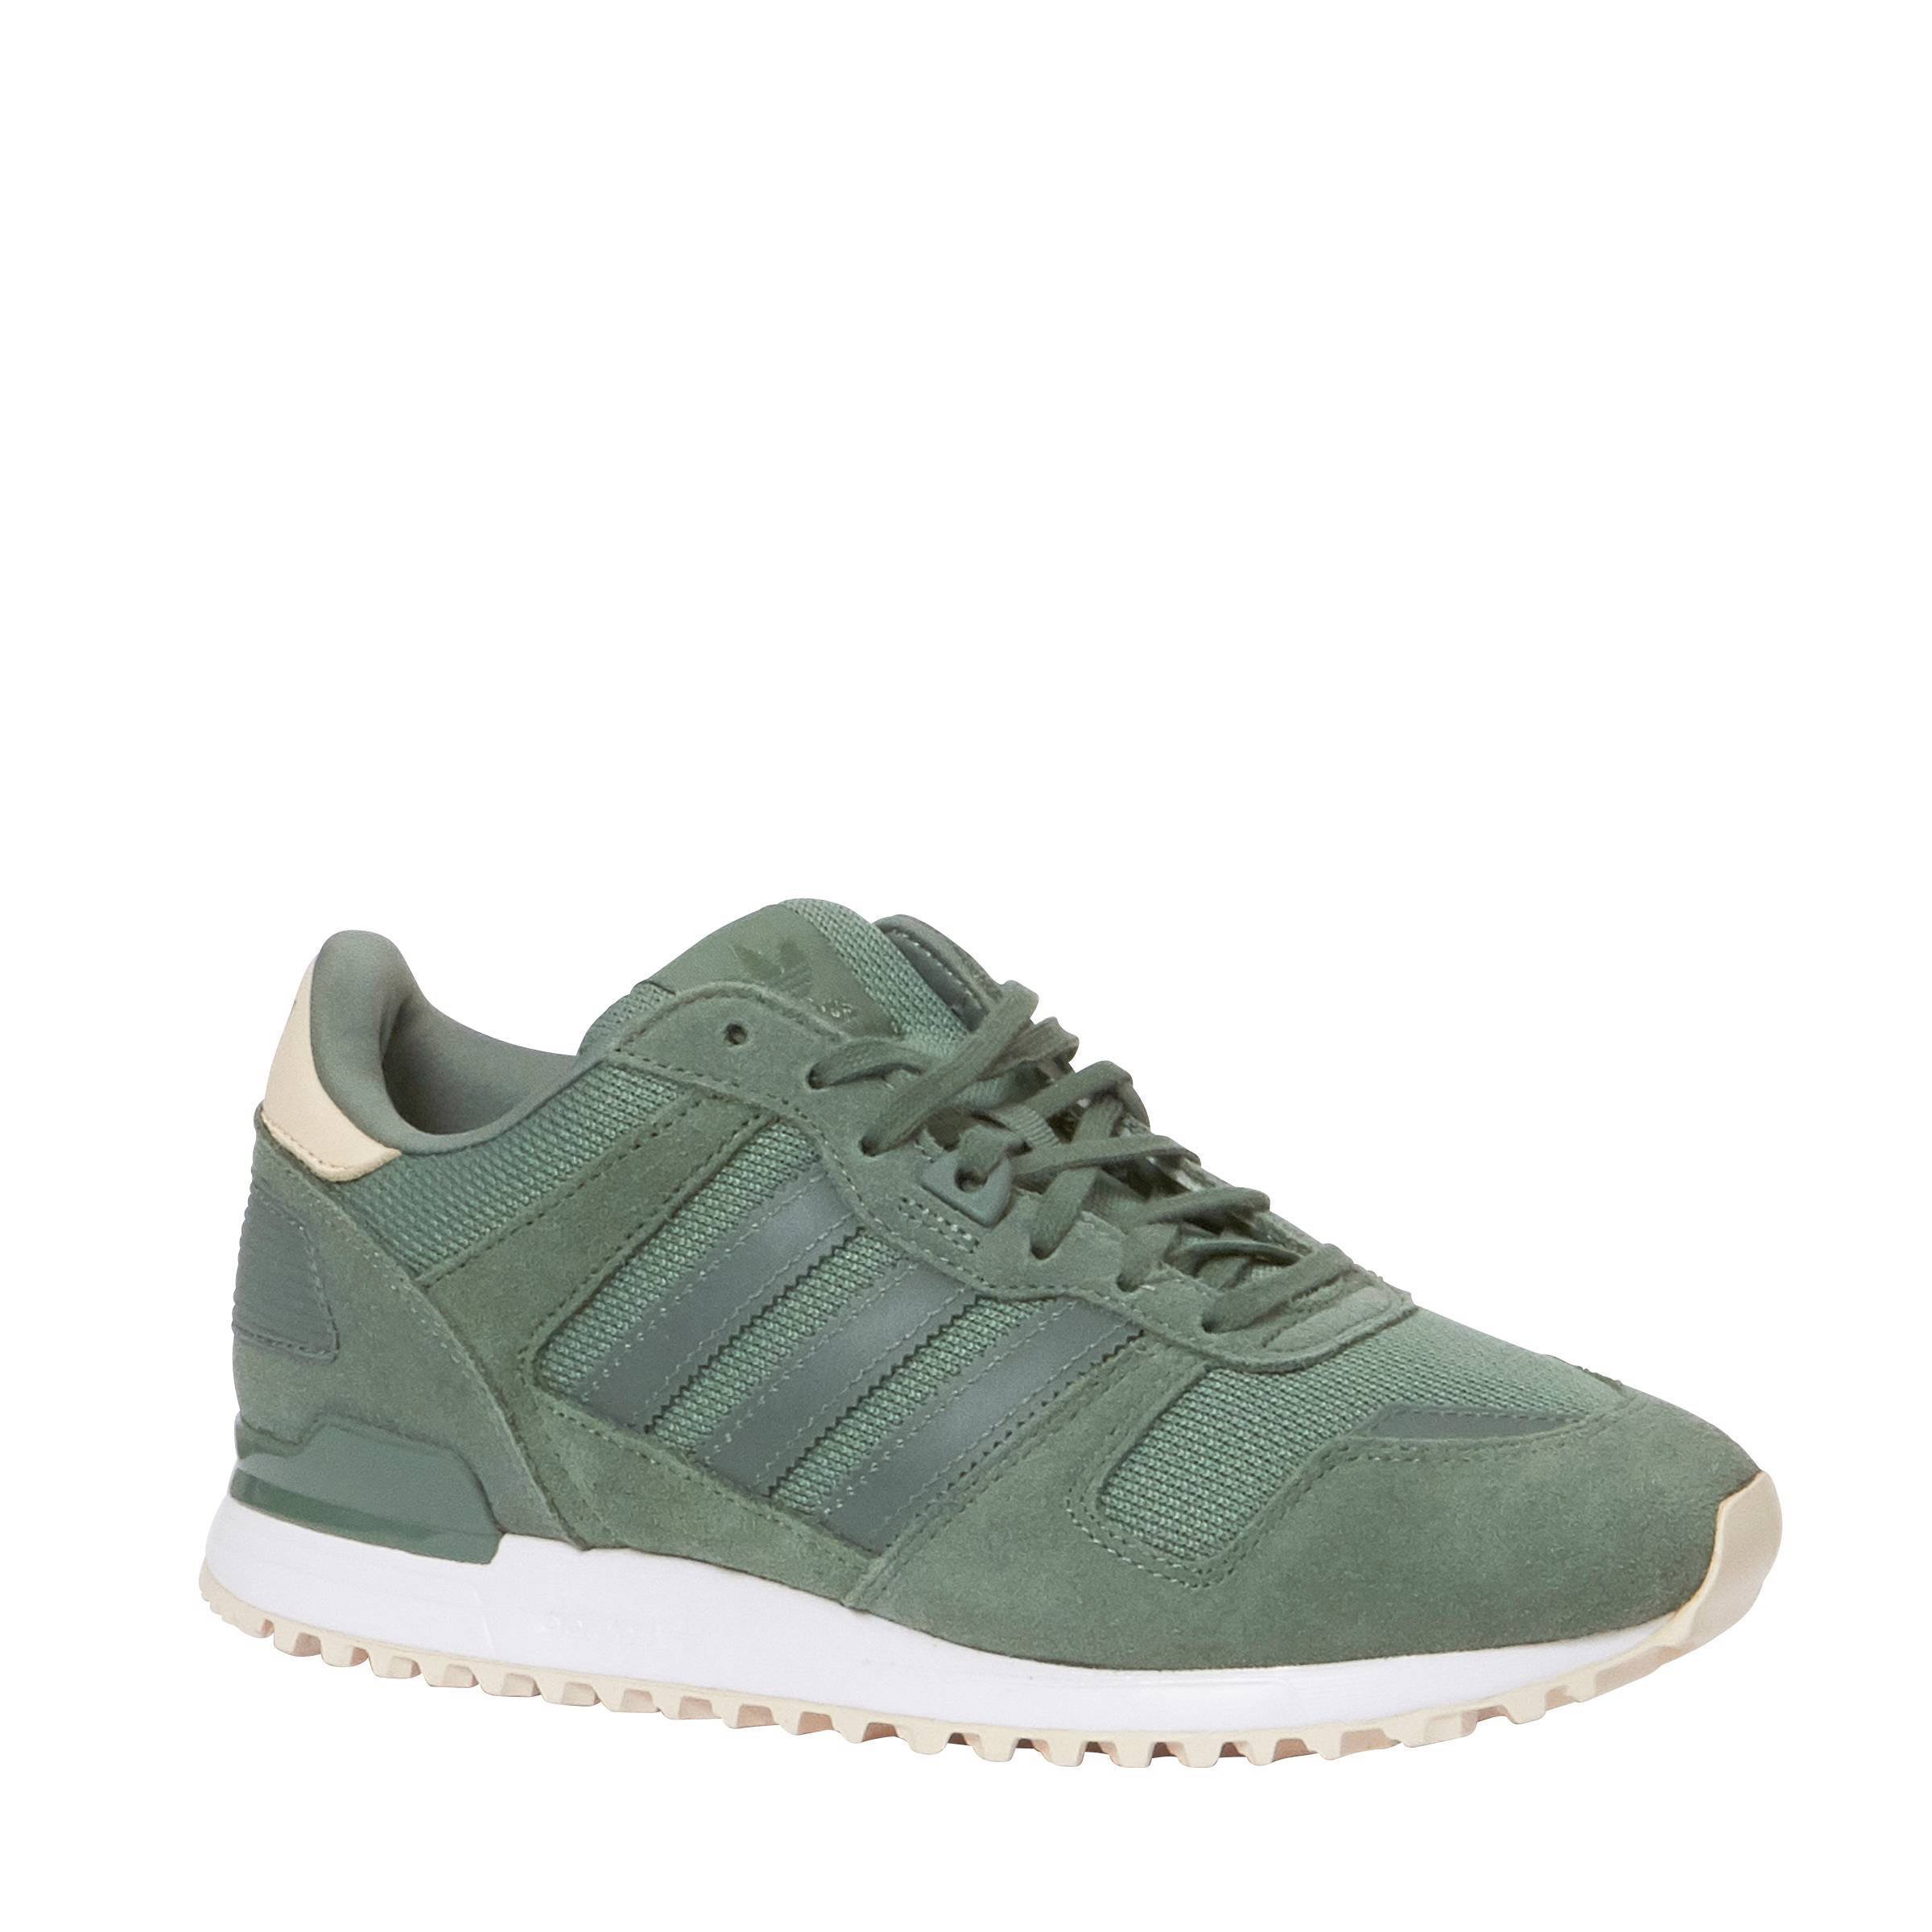 Adidas Sneakers Zx 700 Clearance, 52% OFF | www.hcb.cat